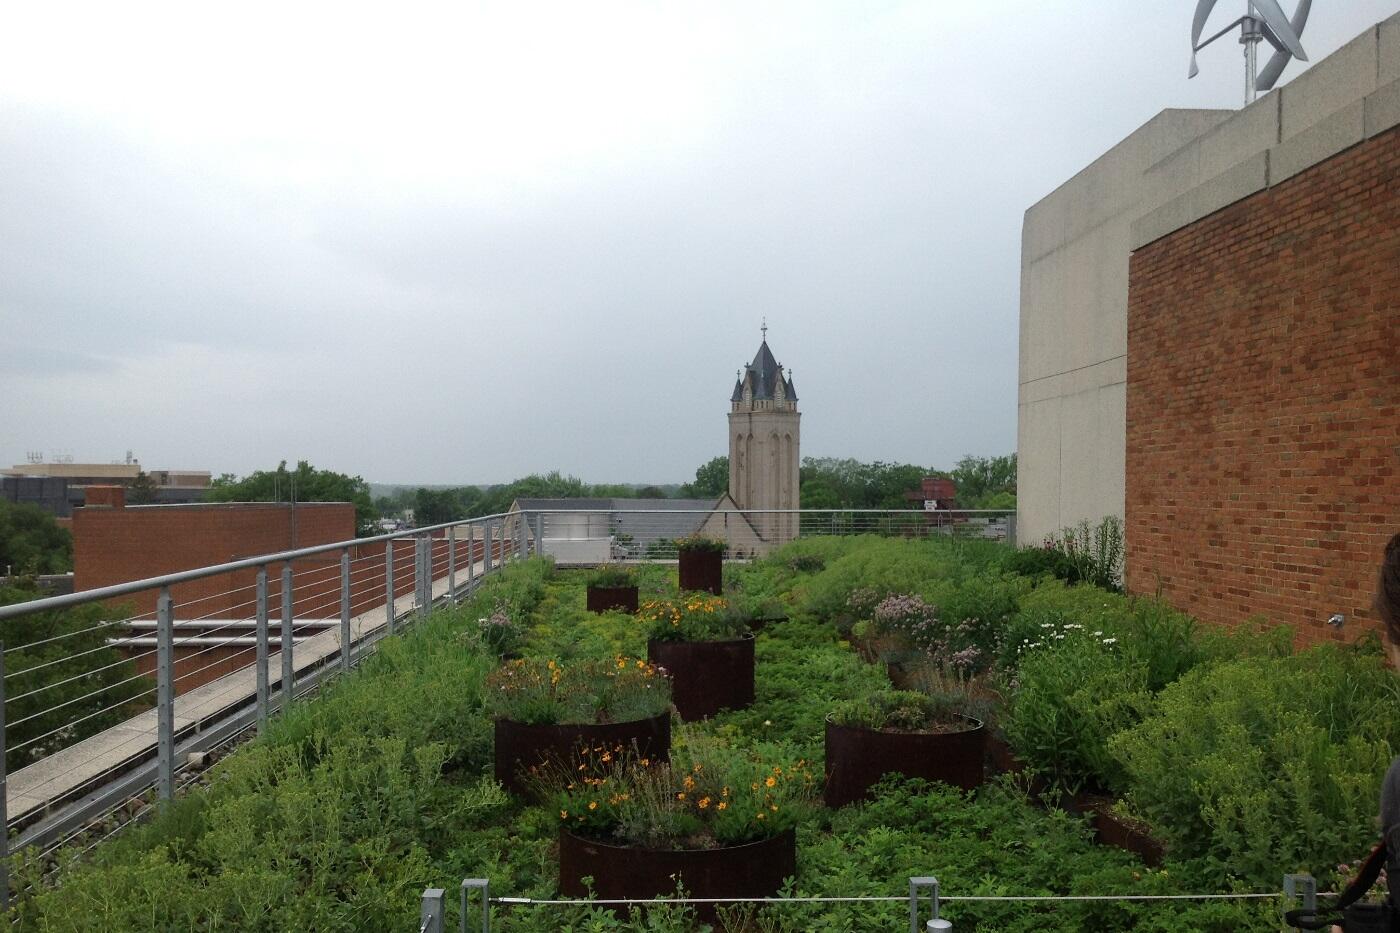 This rooftop garden acts as an urban oasis for insects, birds and stressed undergraduates. The building’s wind turbine can partially be seen in the top right.